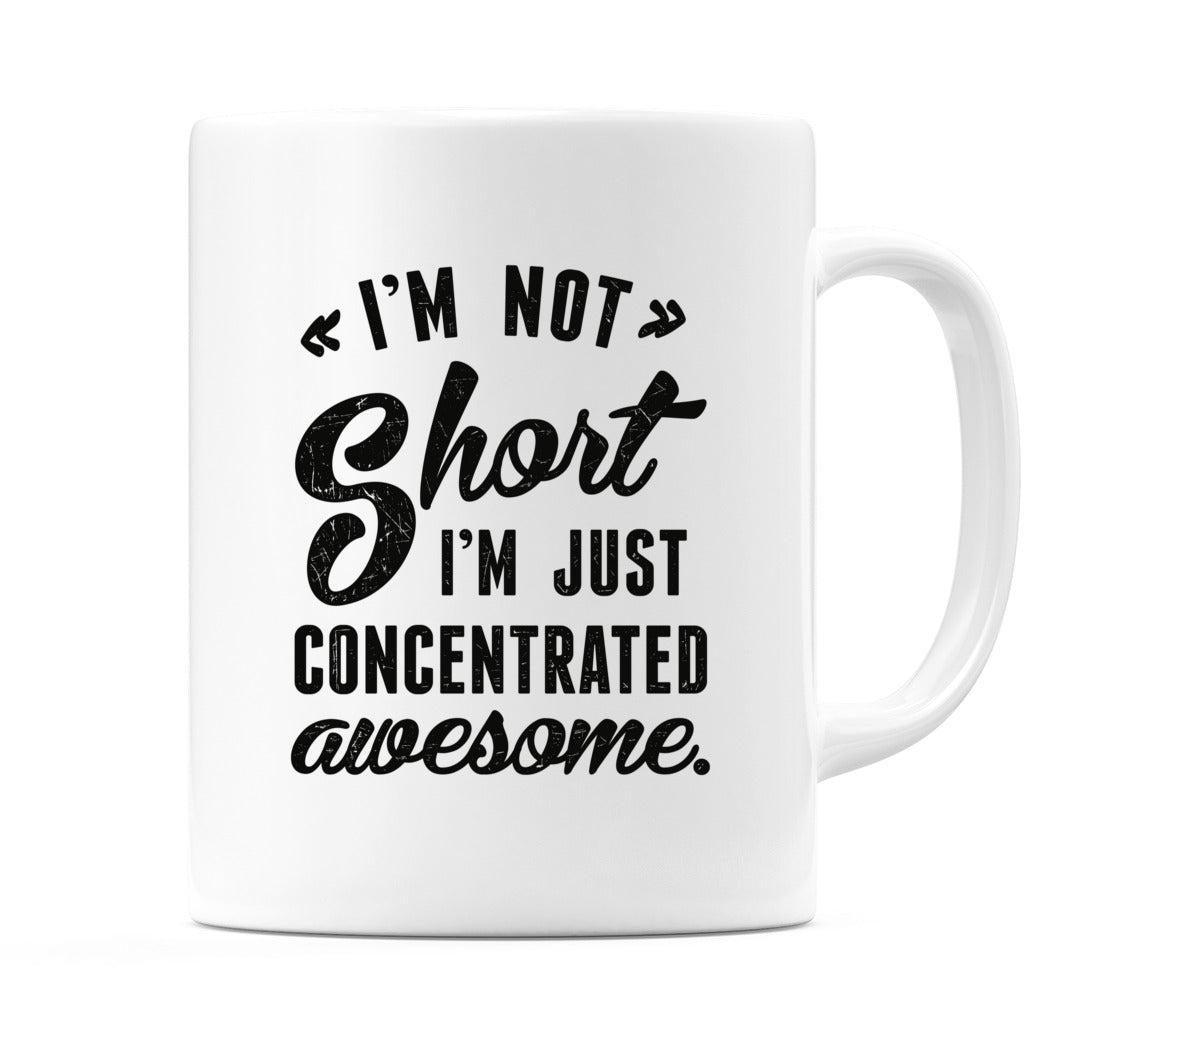 I'M NOT Short I'm JUST CONCENTRATED awesome. Mug